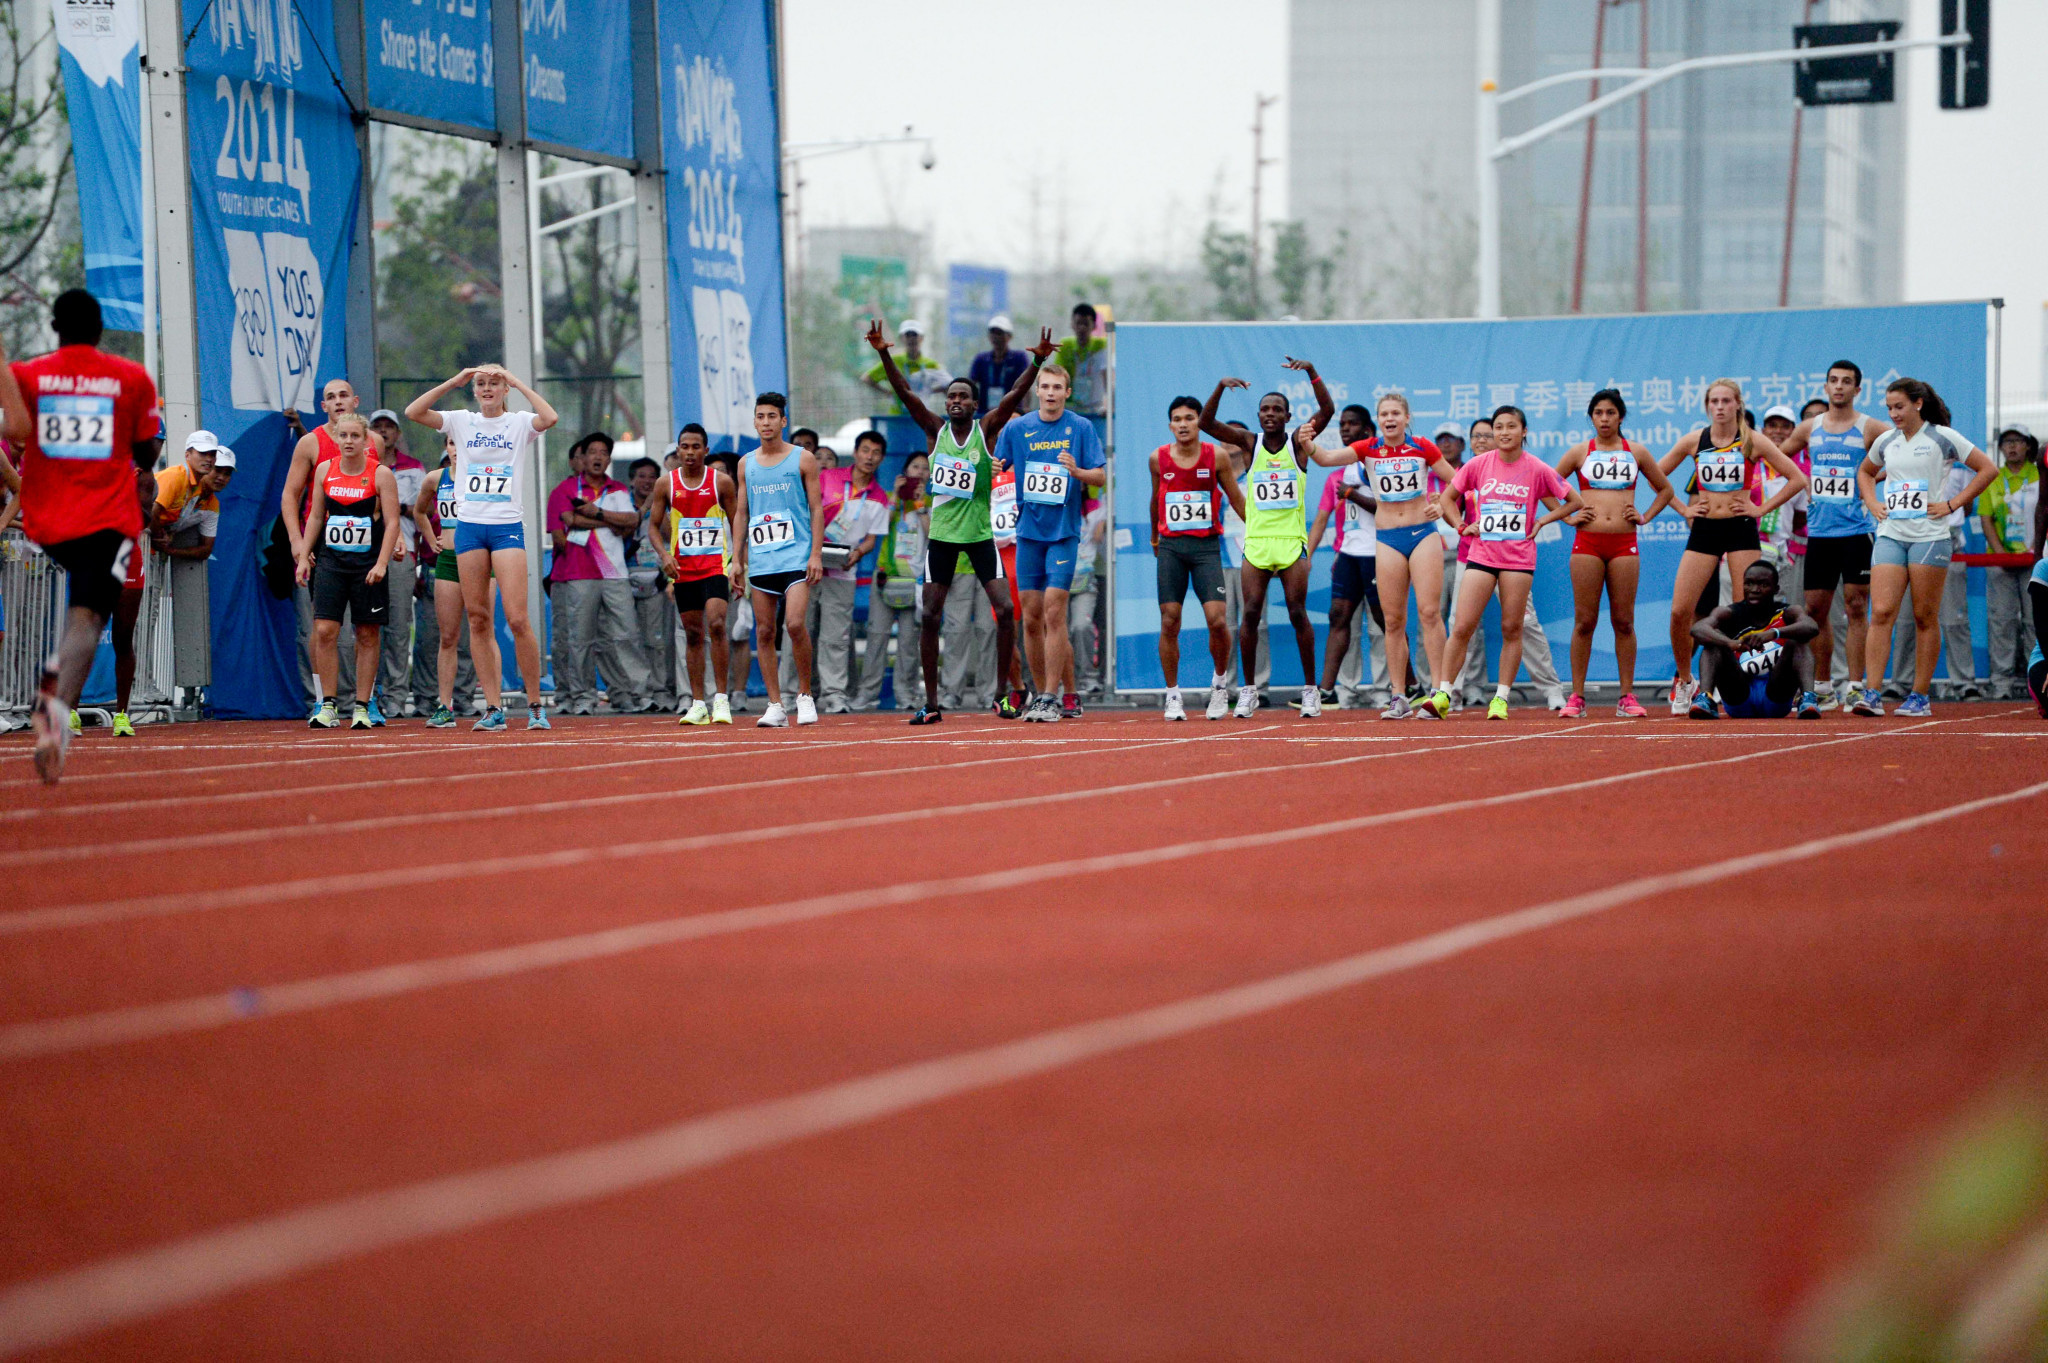 Competitors from 179 countries set to compete in "innovative" athletics programme at Buenos Aires 2018